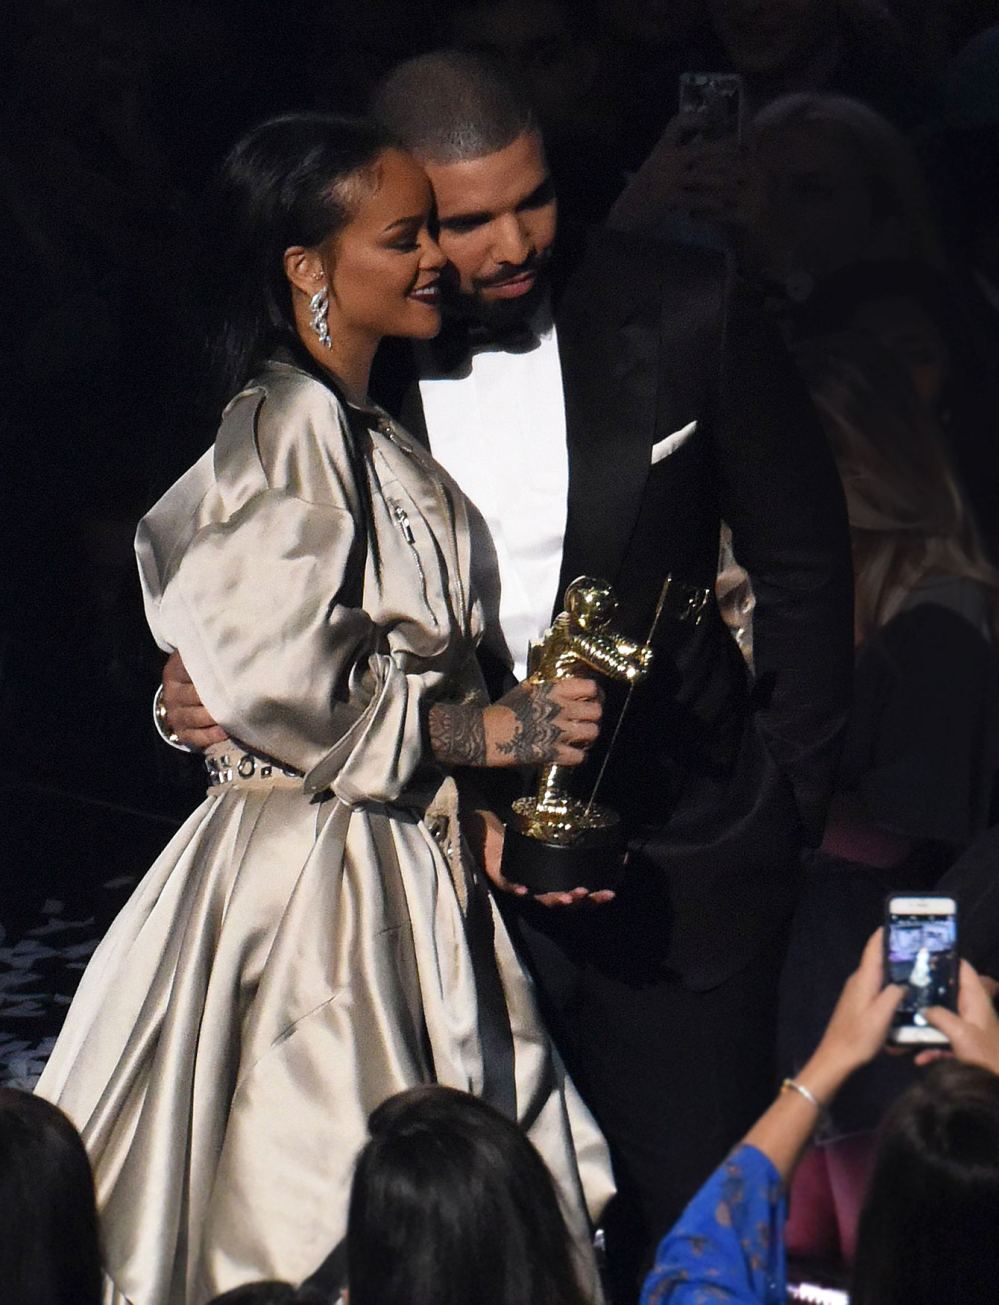 Rihanna Covers Up the Matching Shark Tattoo She Got With Drake: Details